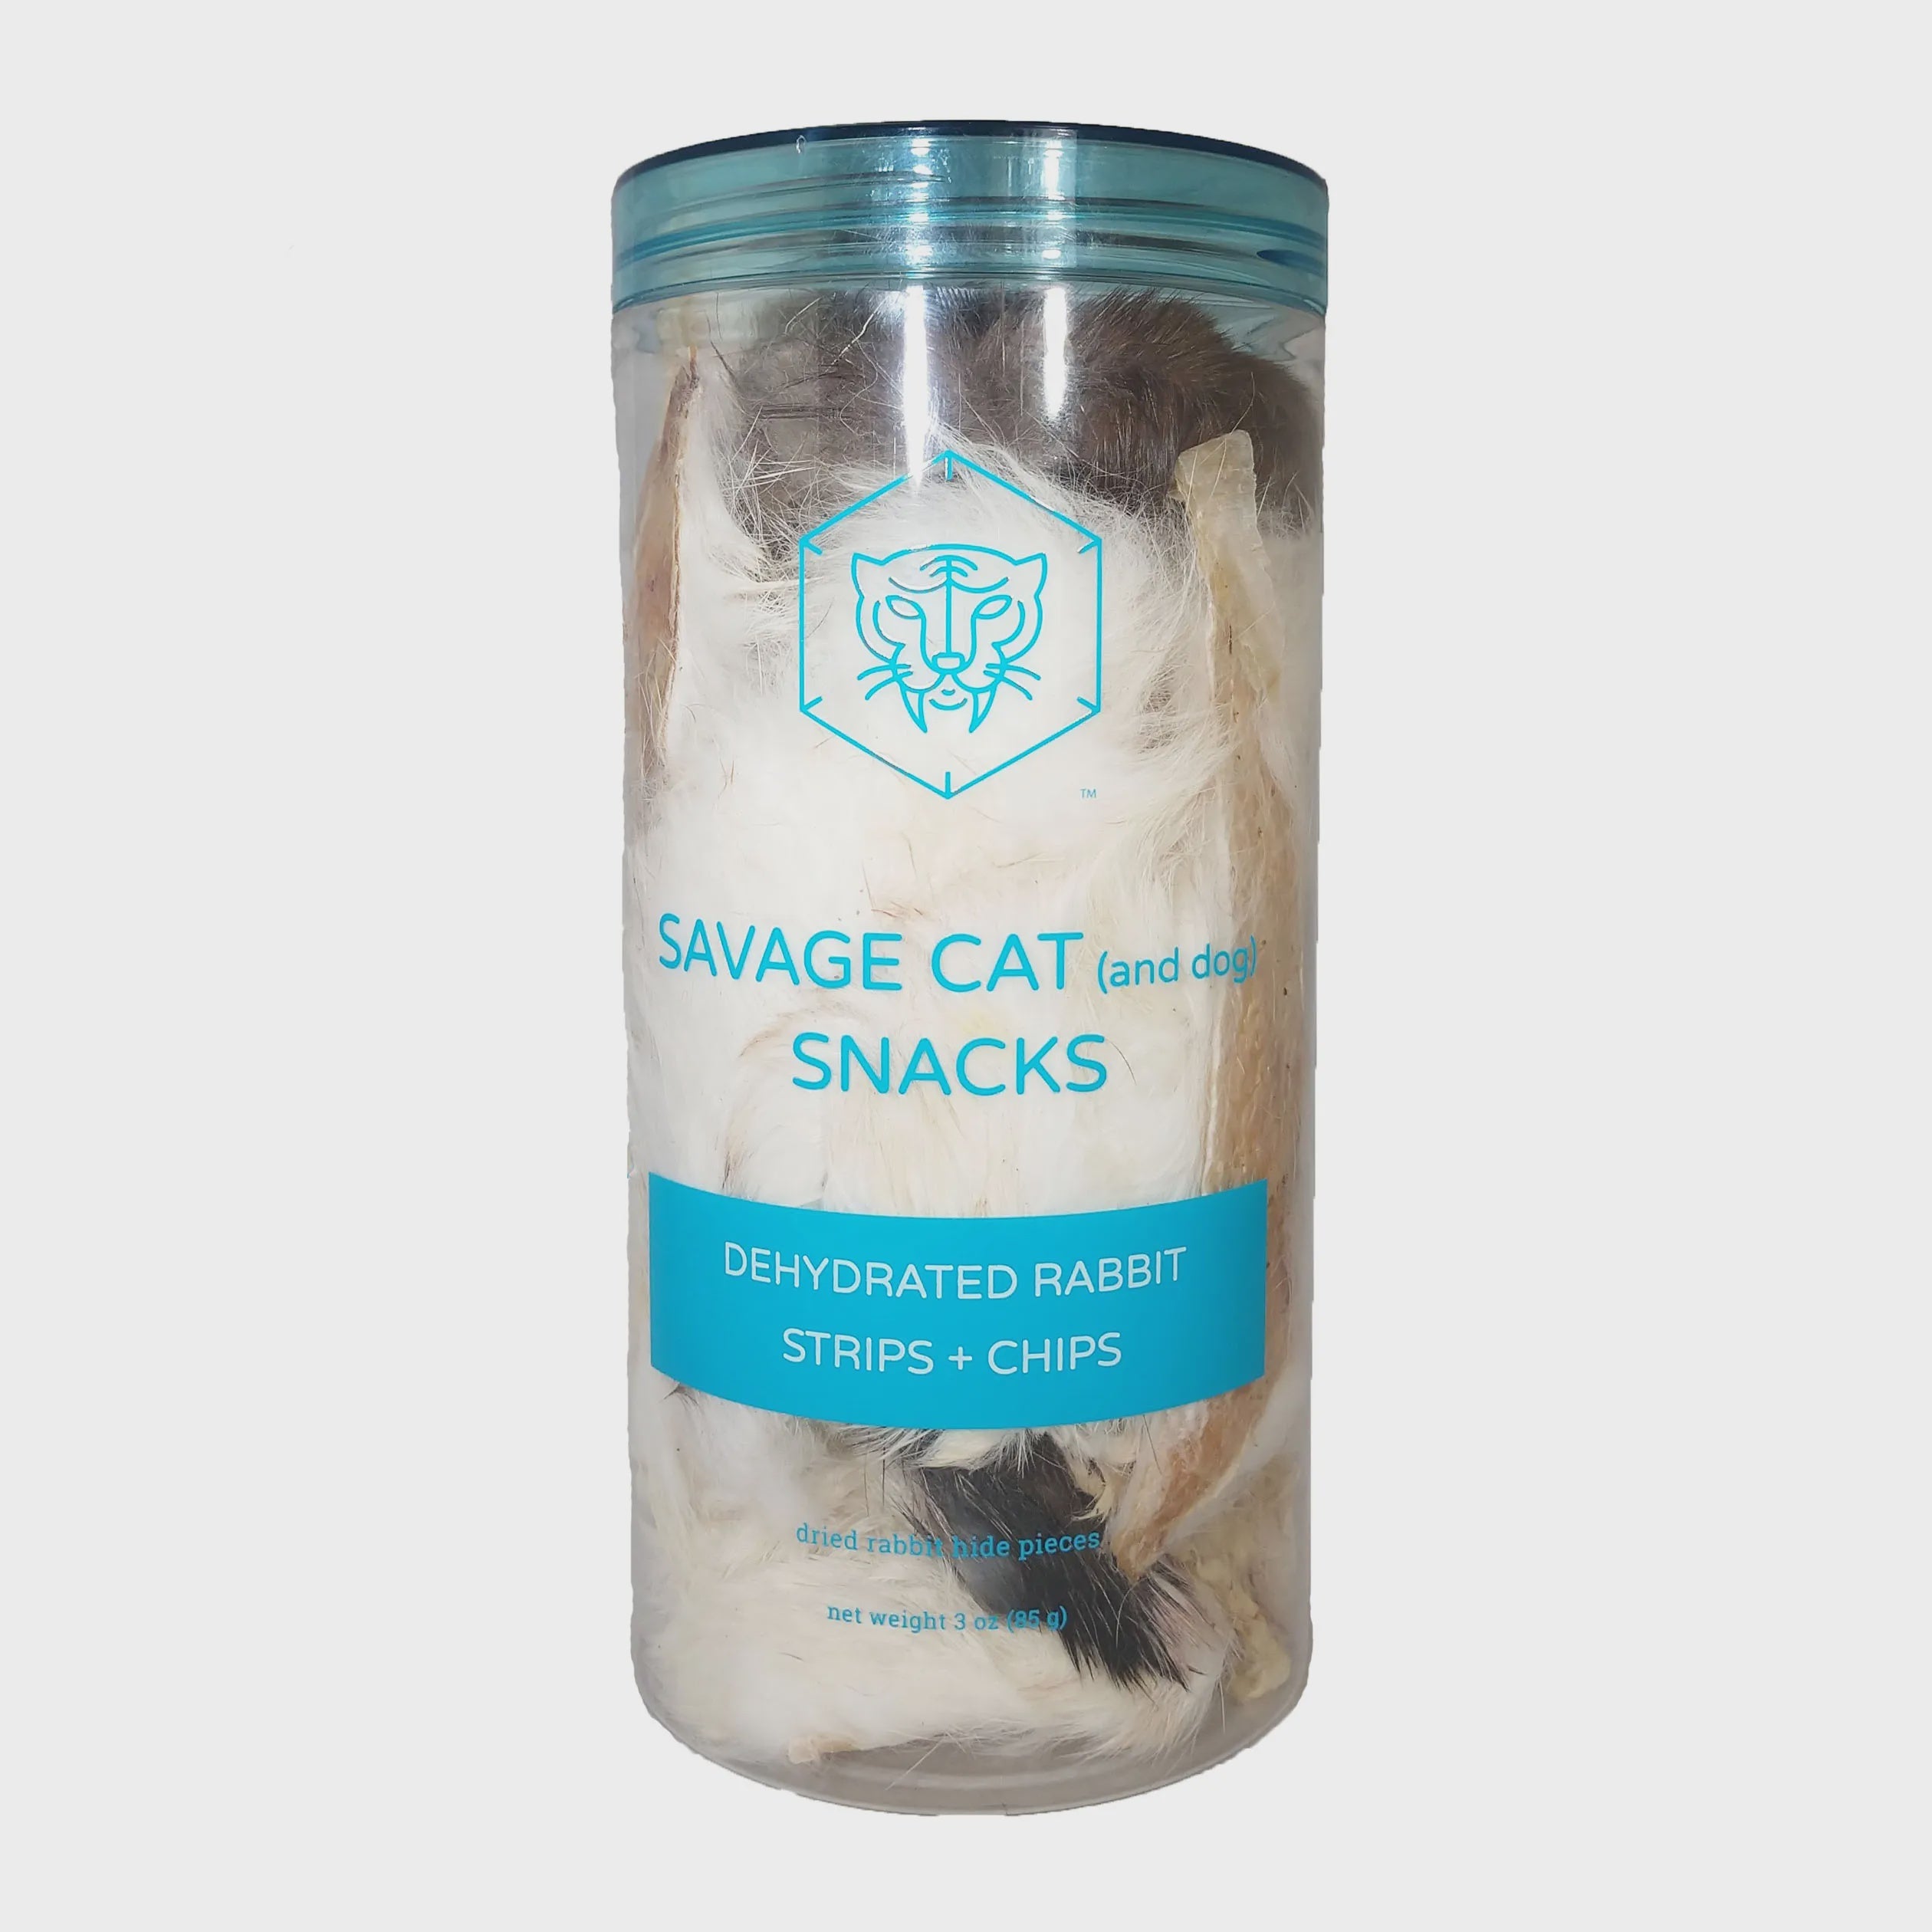 Savage Cat (and dog) Snacks - Dehydrated Rabbit Strips + Chips